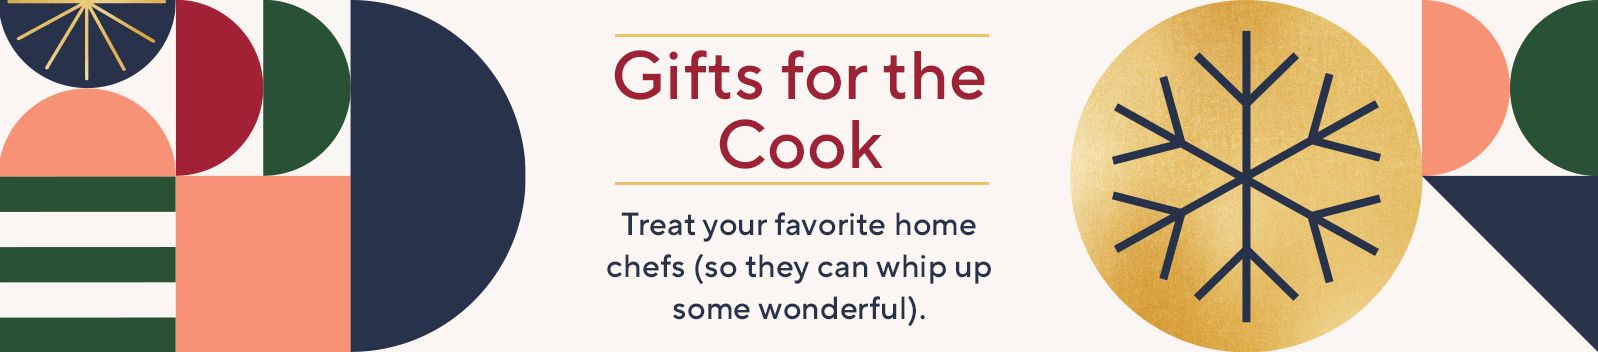 Gifts for the Cook - Treat your favorite home chefs (so they can whip up some wonderful). 